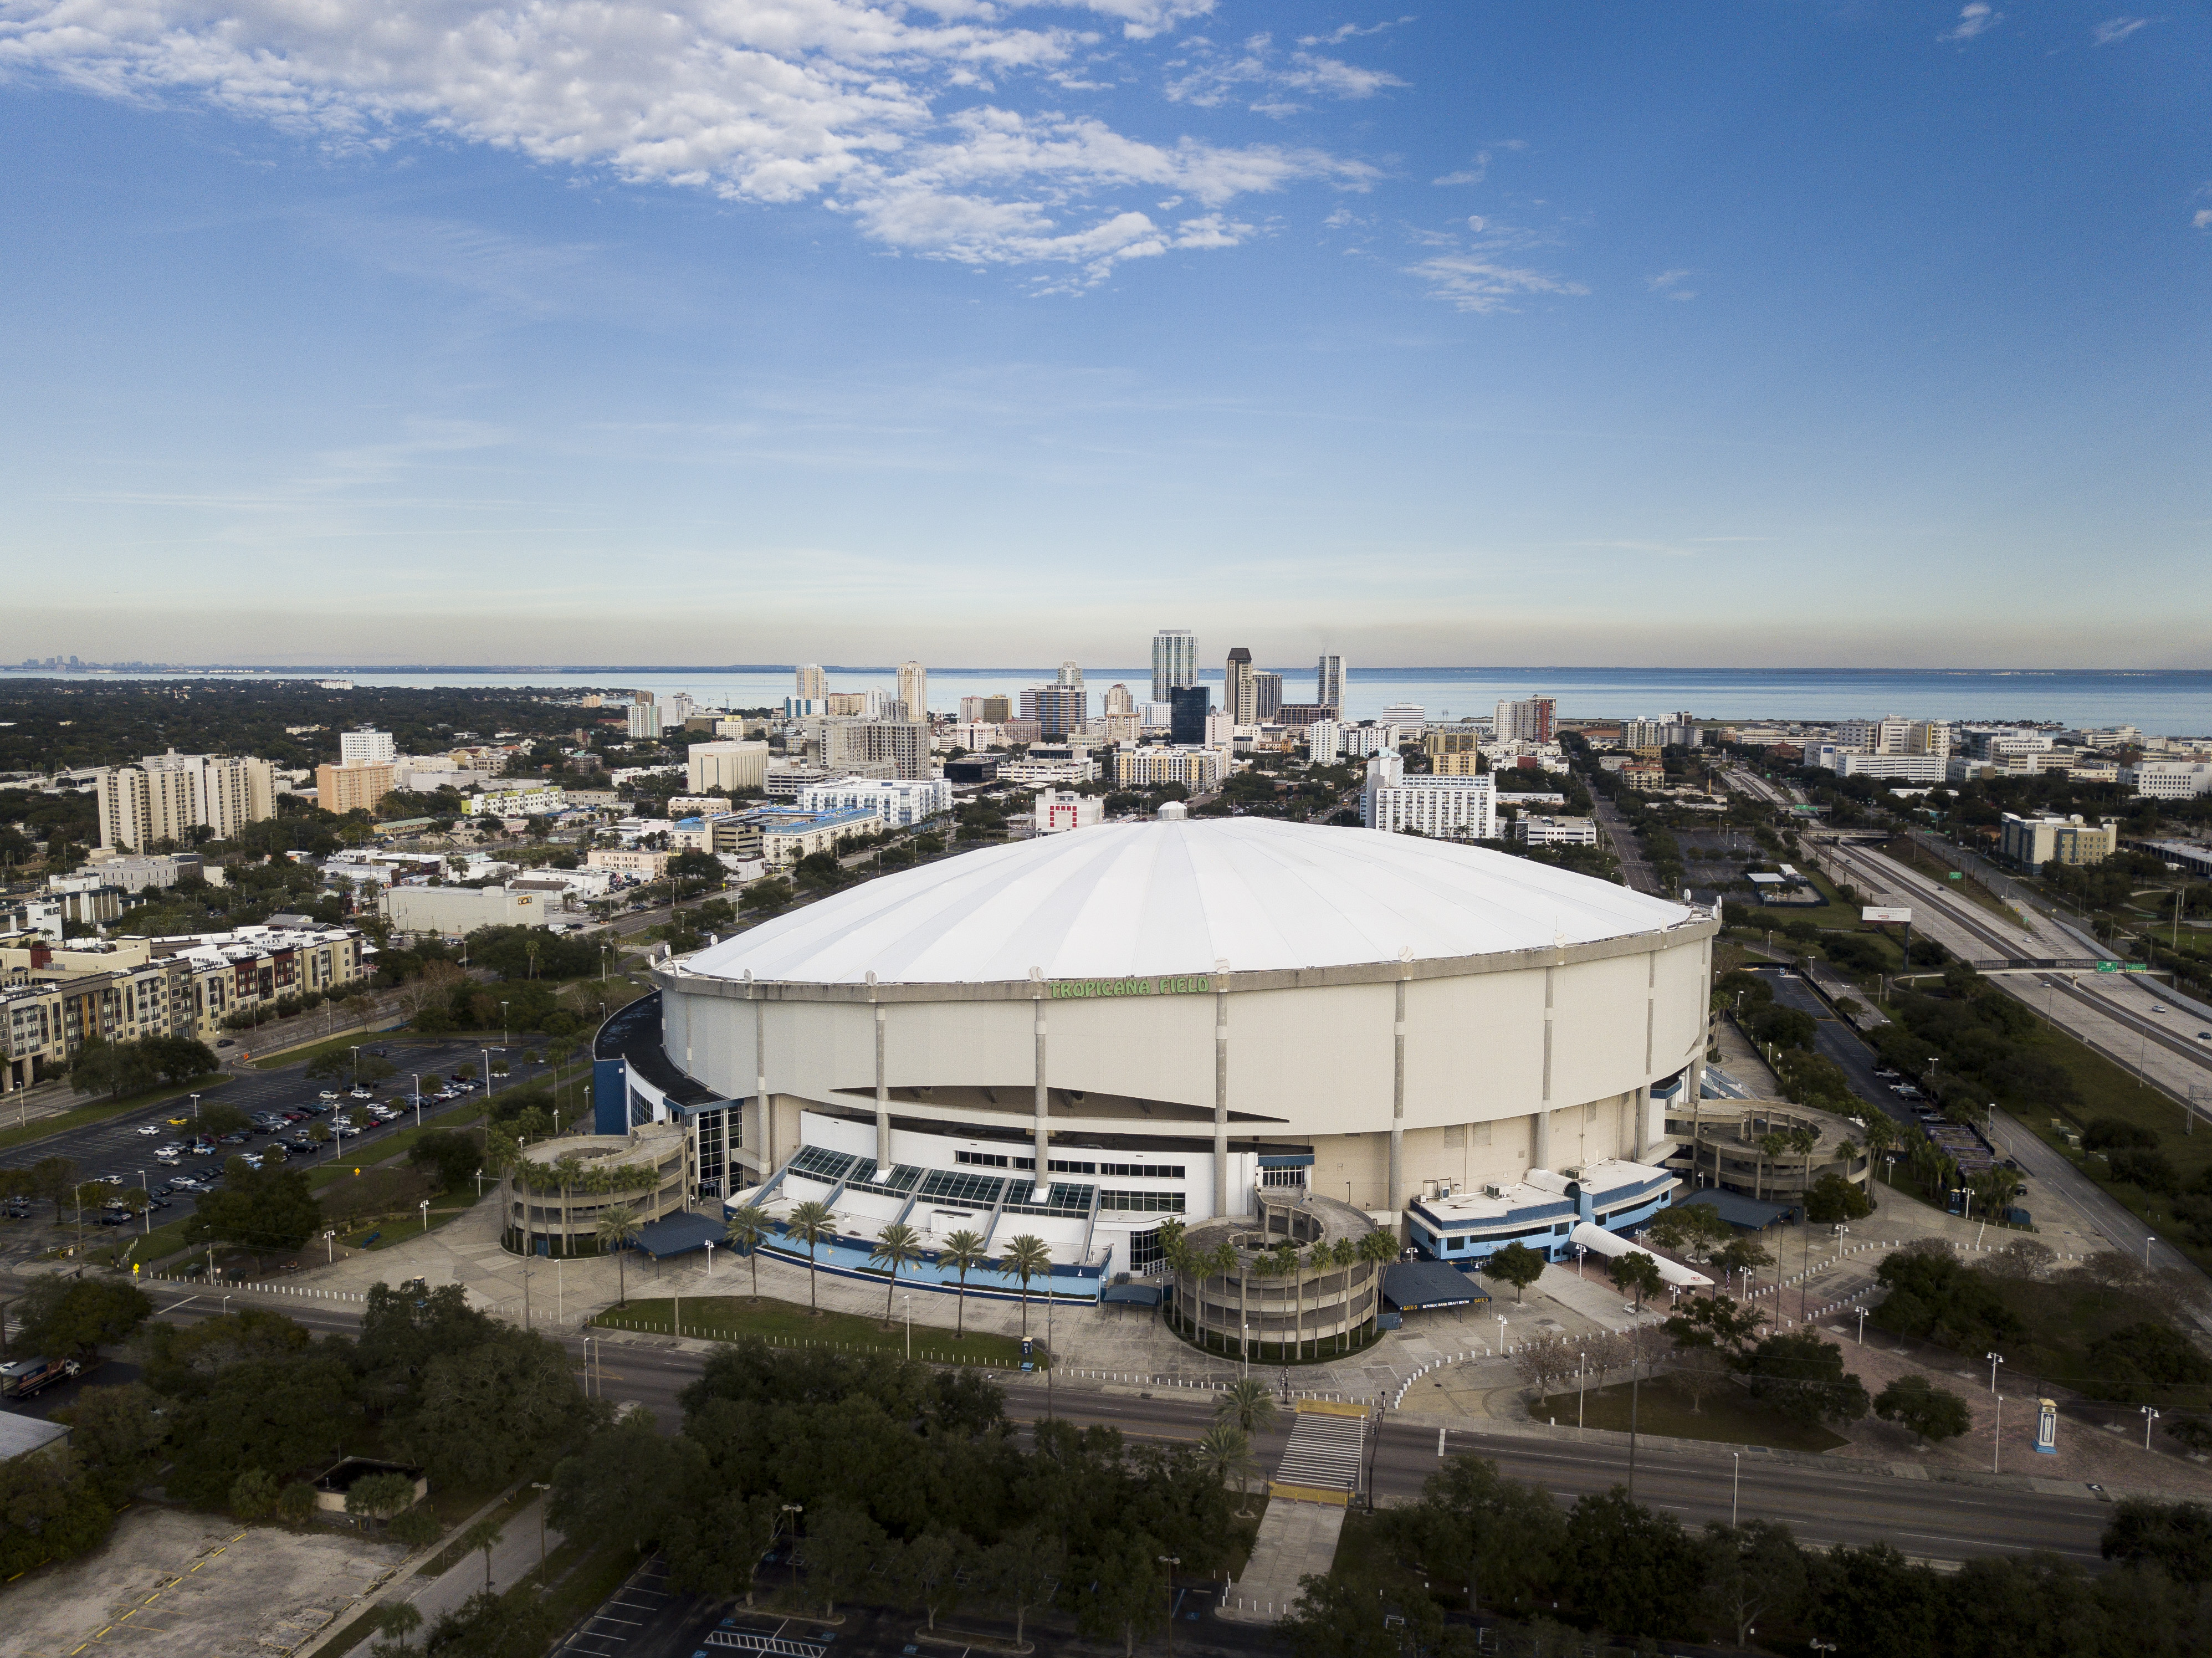 Tropicana Field - Facts, figures, pictures and more of the Beef 'O